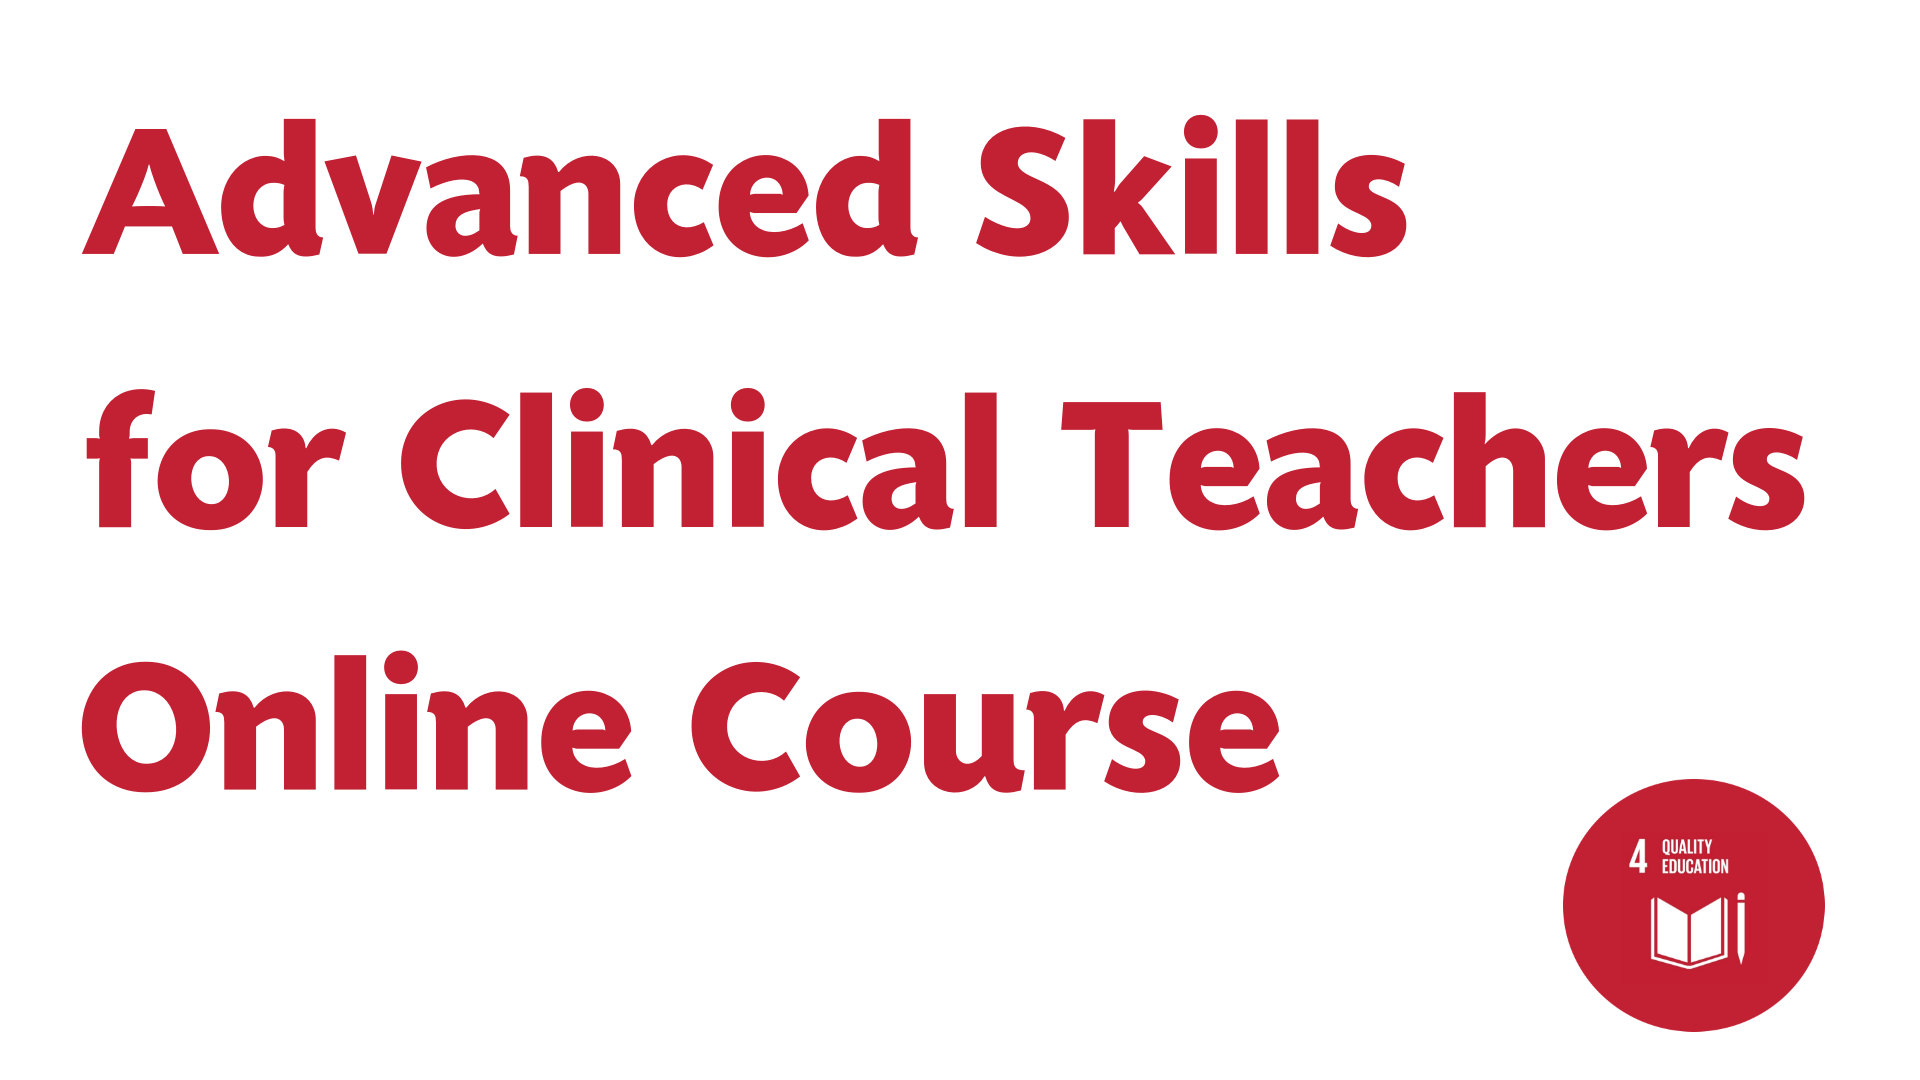 Advanced Skills for Clinical Teachers: Online Course